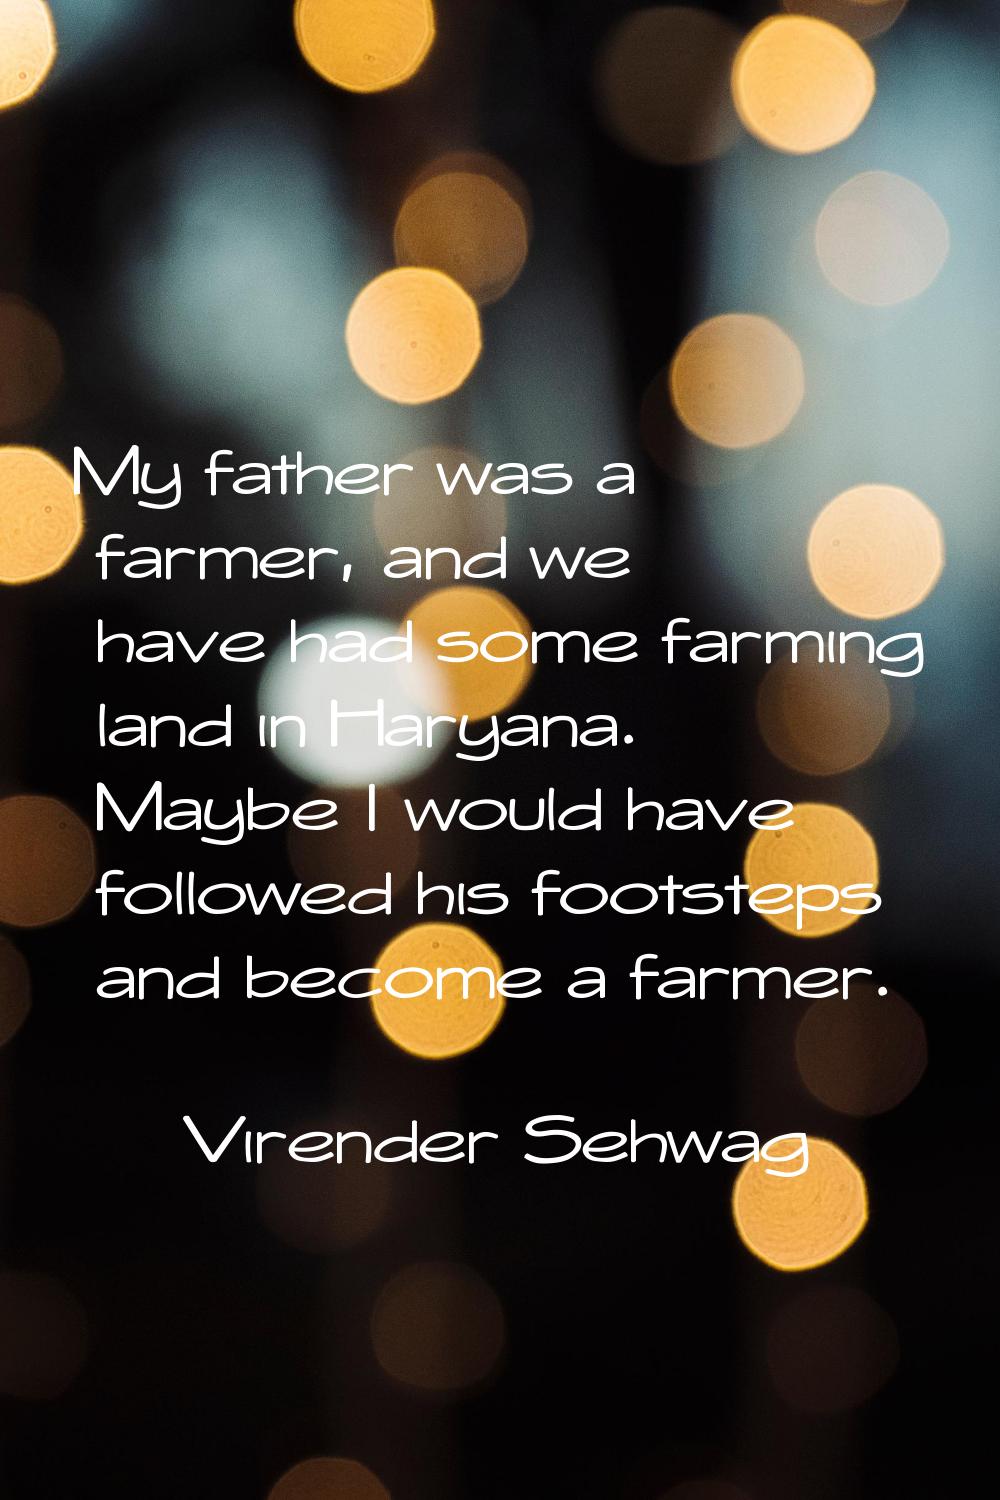 My father was a farmer, and we have had some farming land in Haryana. Maybe I would have followed h